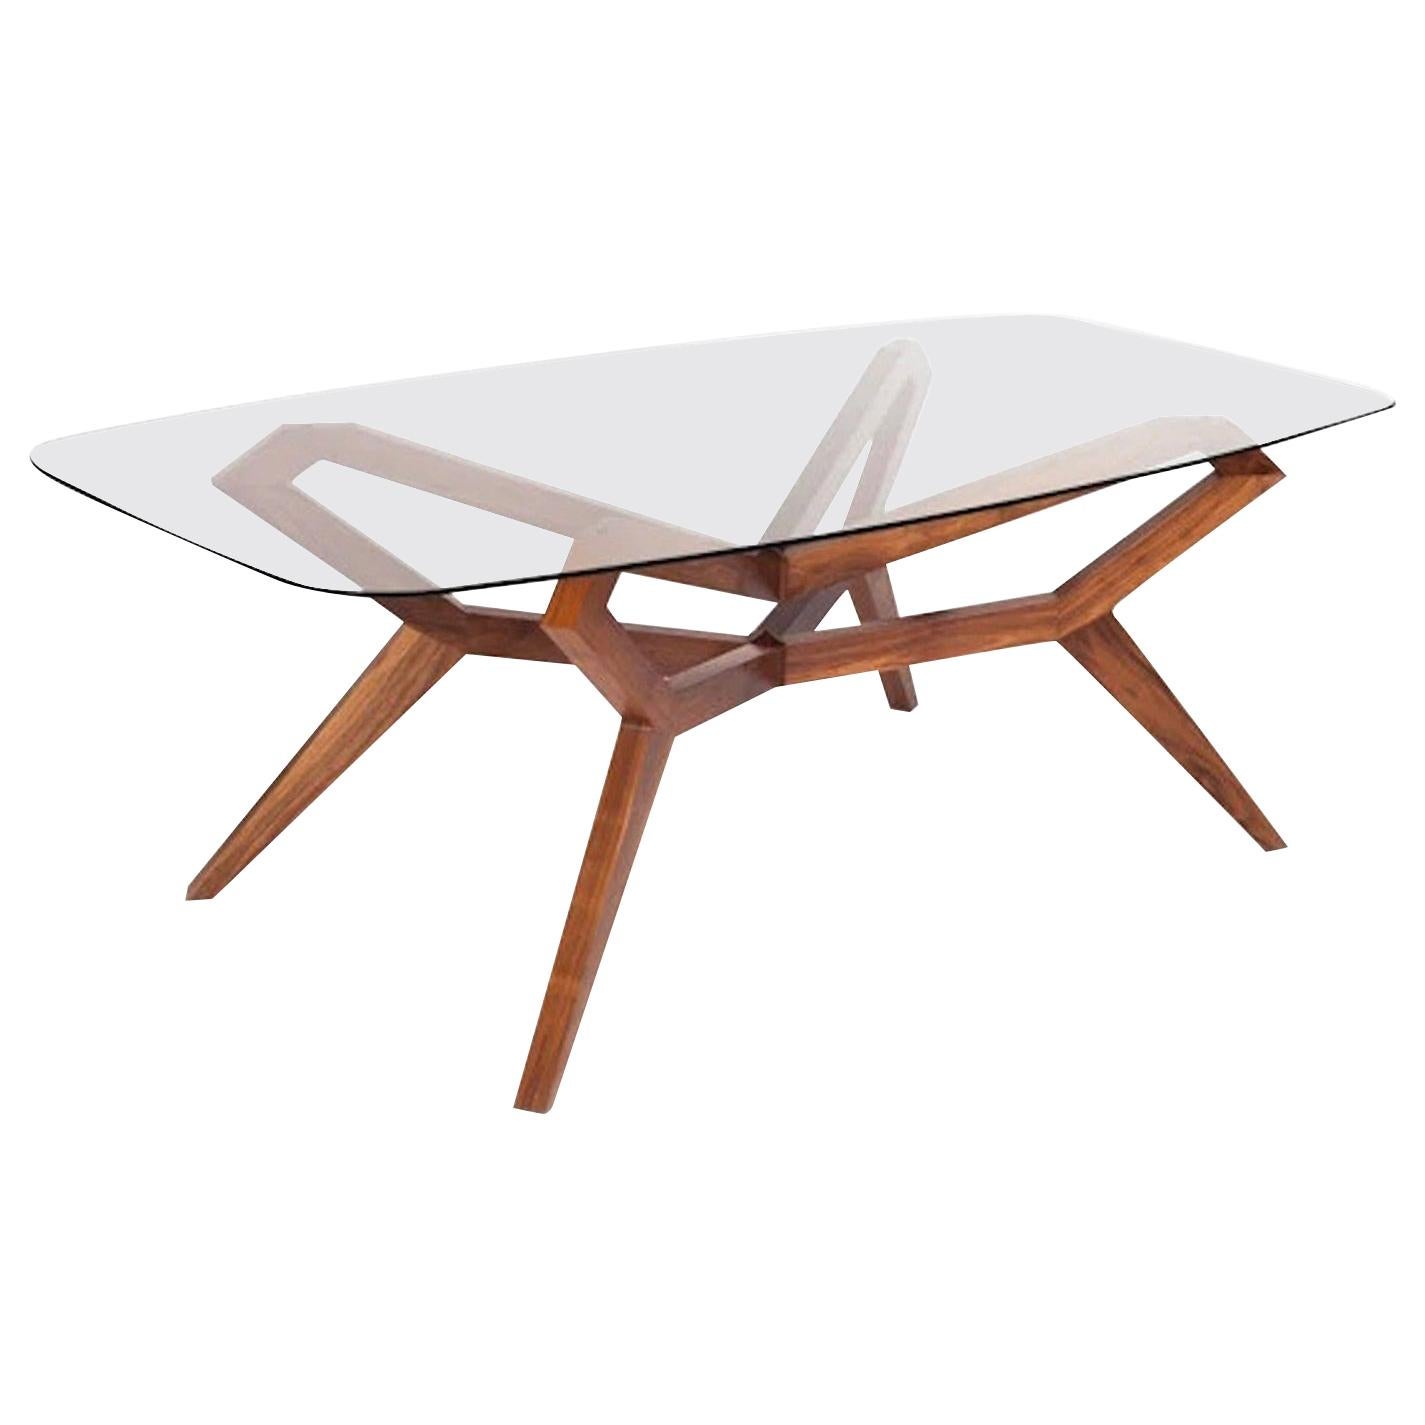 'Dragonfly' Dining Table by Chinese Jesus for Holly Hunt